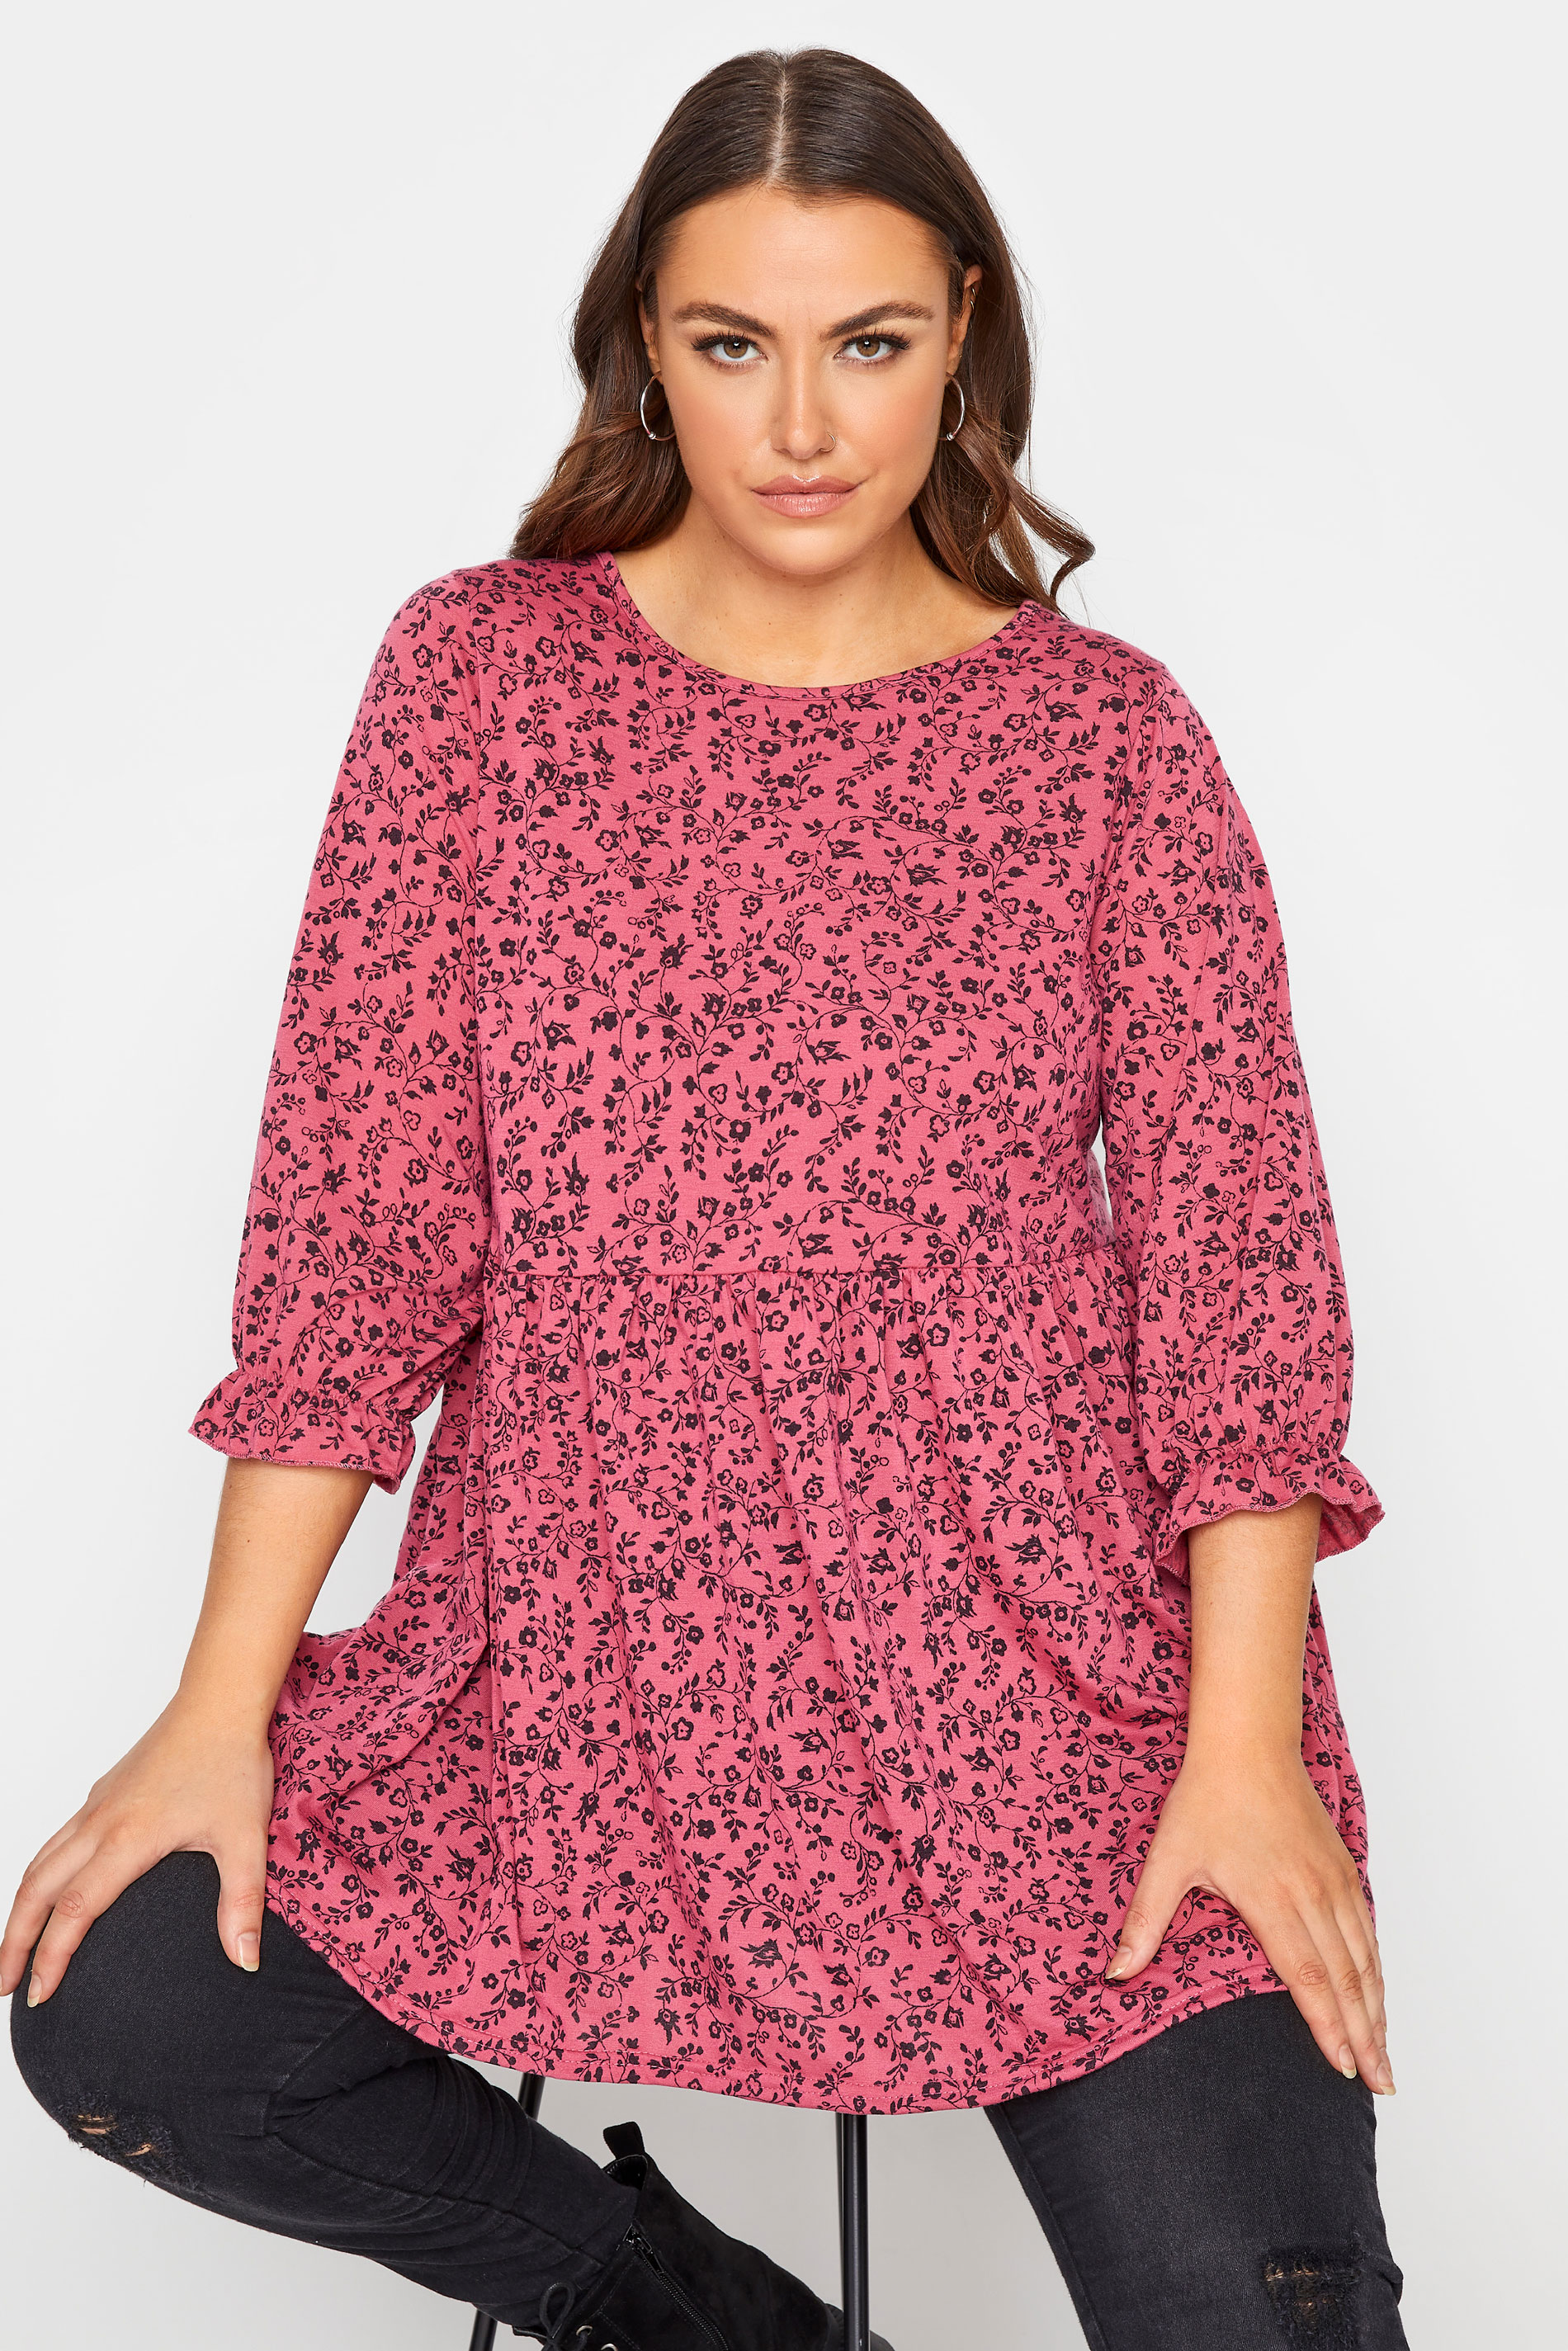 LIMITED COLLECTION Pink Ditsy Print Frill Peplum Top_A.jpg